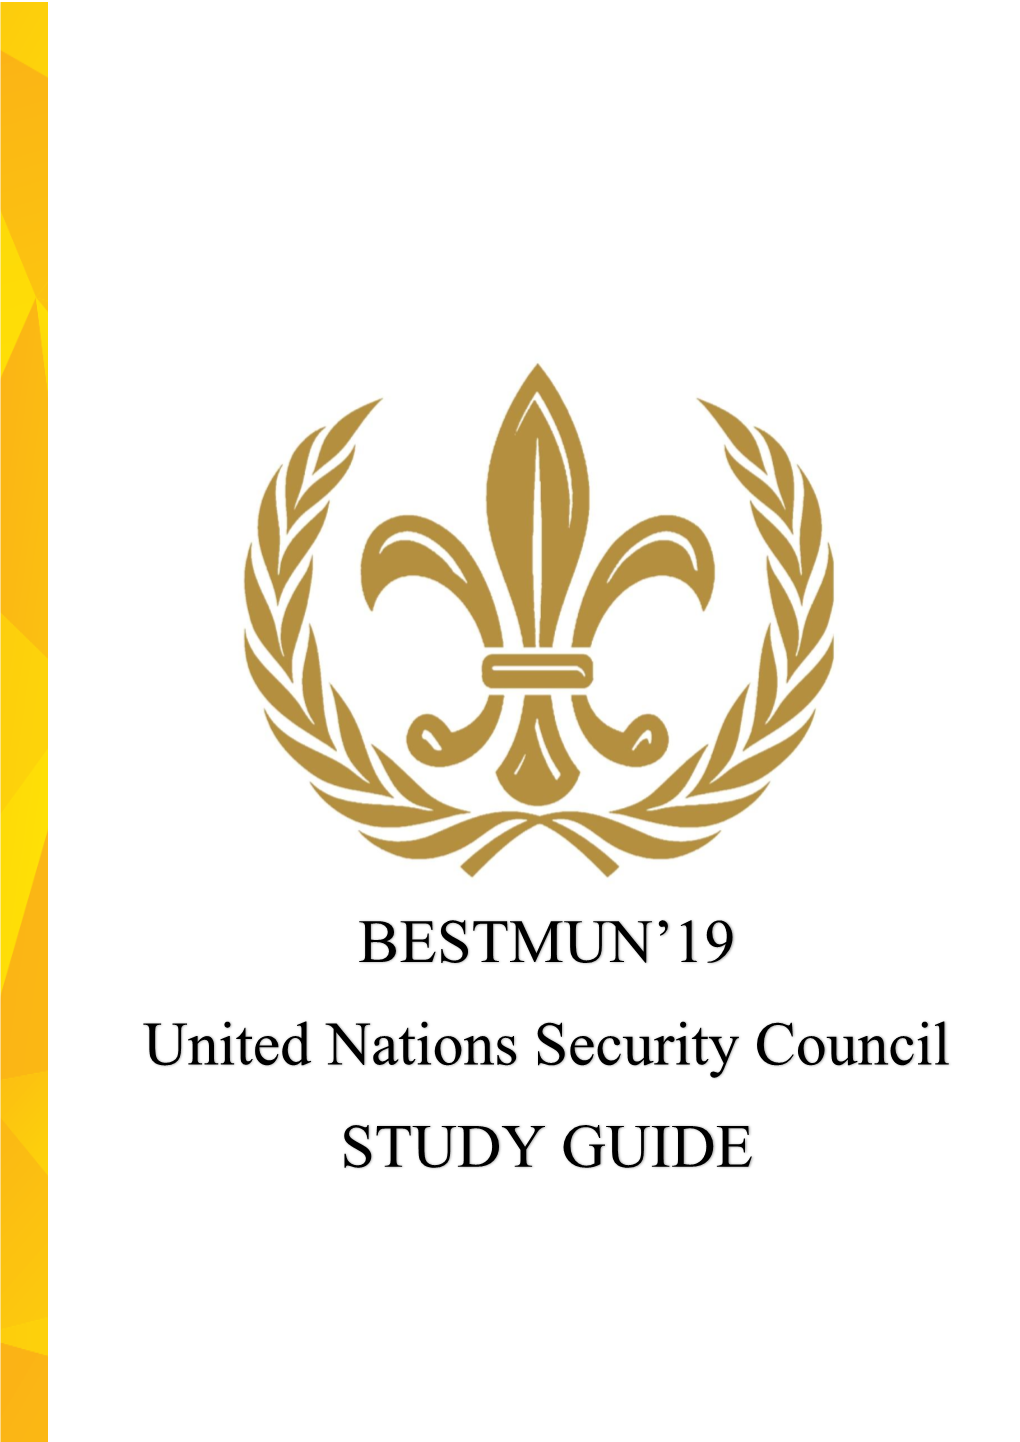 Report of Uned Natıons Under-Secretary-General for Safety